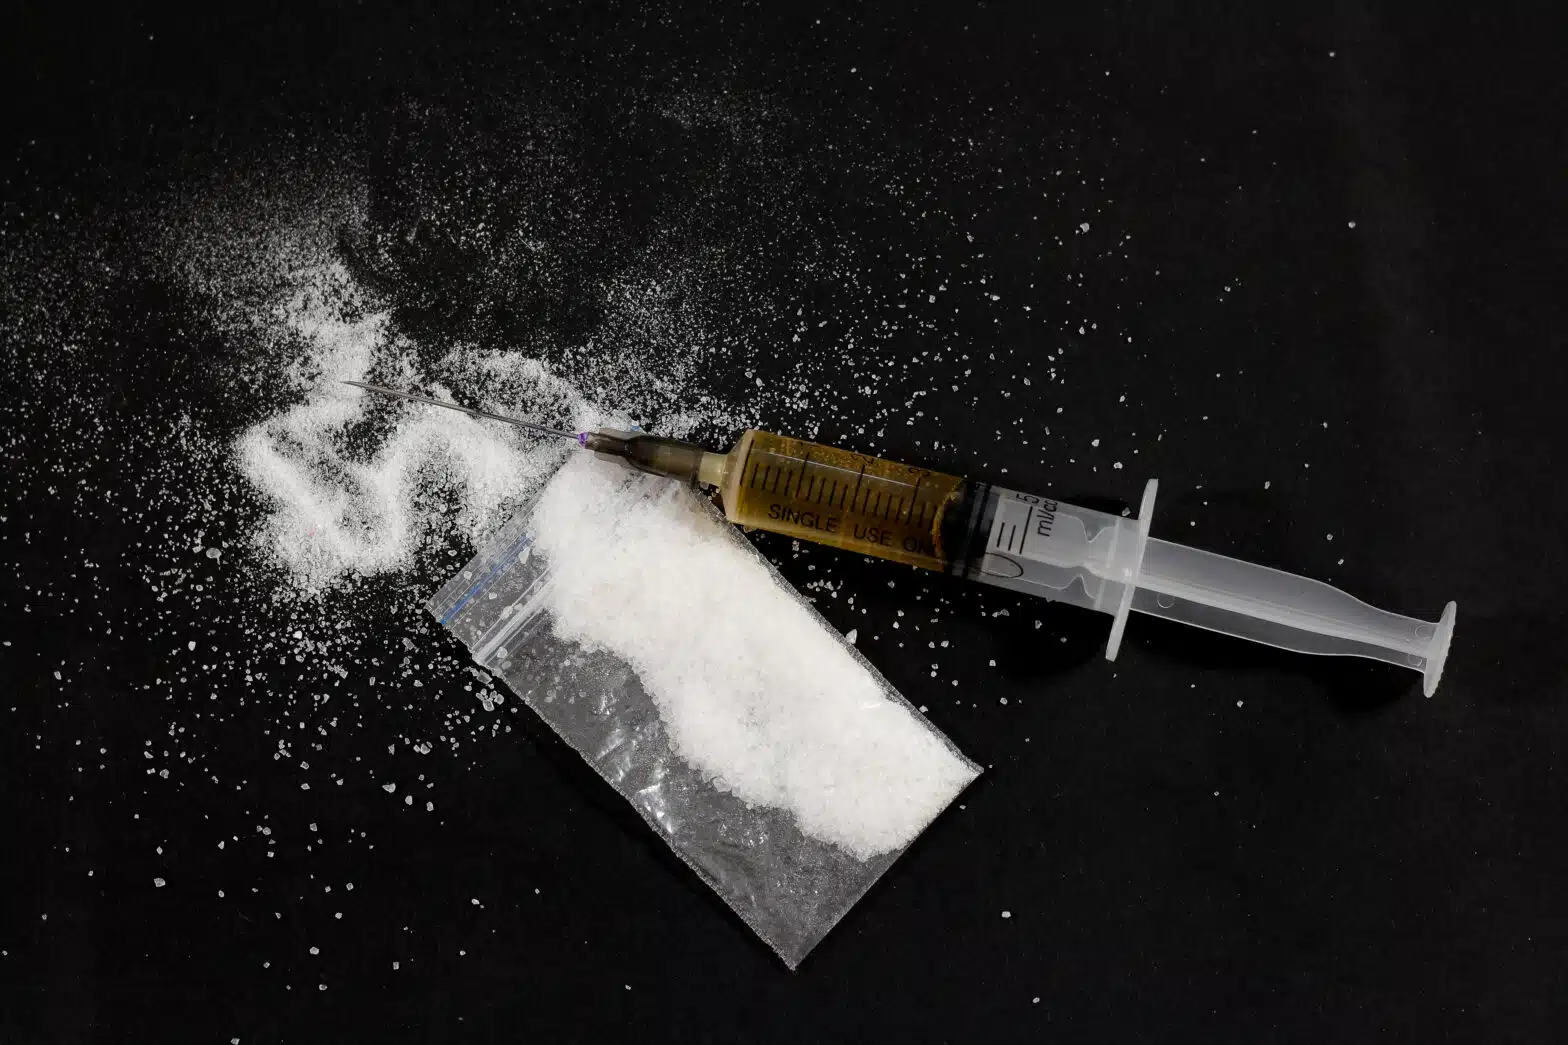 White powder spills out of a plastic bag, a syringe with a brown liquid lays next to it - 7 Signs Your Loved One Is Shooting Up Drugs